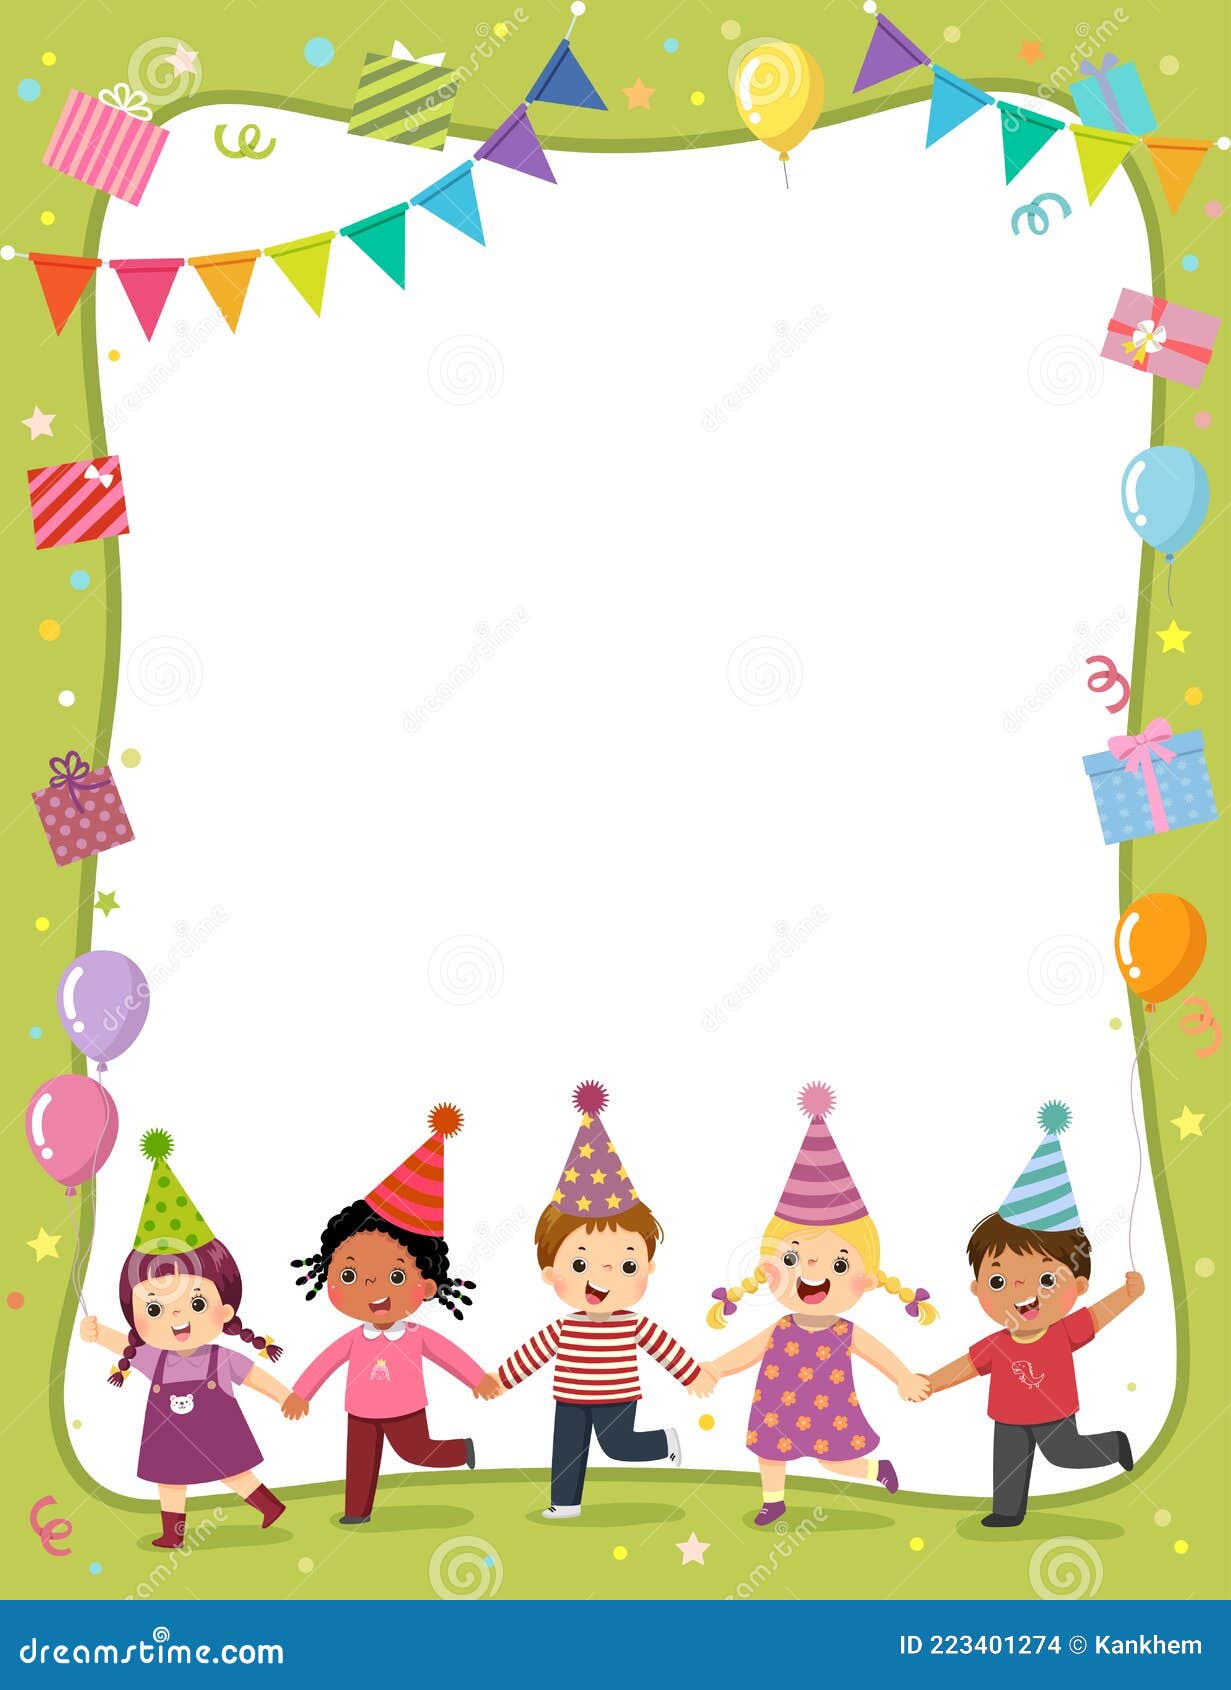 Template with Cartoon of Happy Kids for Invitation or Birthday Party Card  Stock Vector - Illustration of character, friend: 223401274